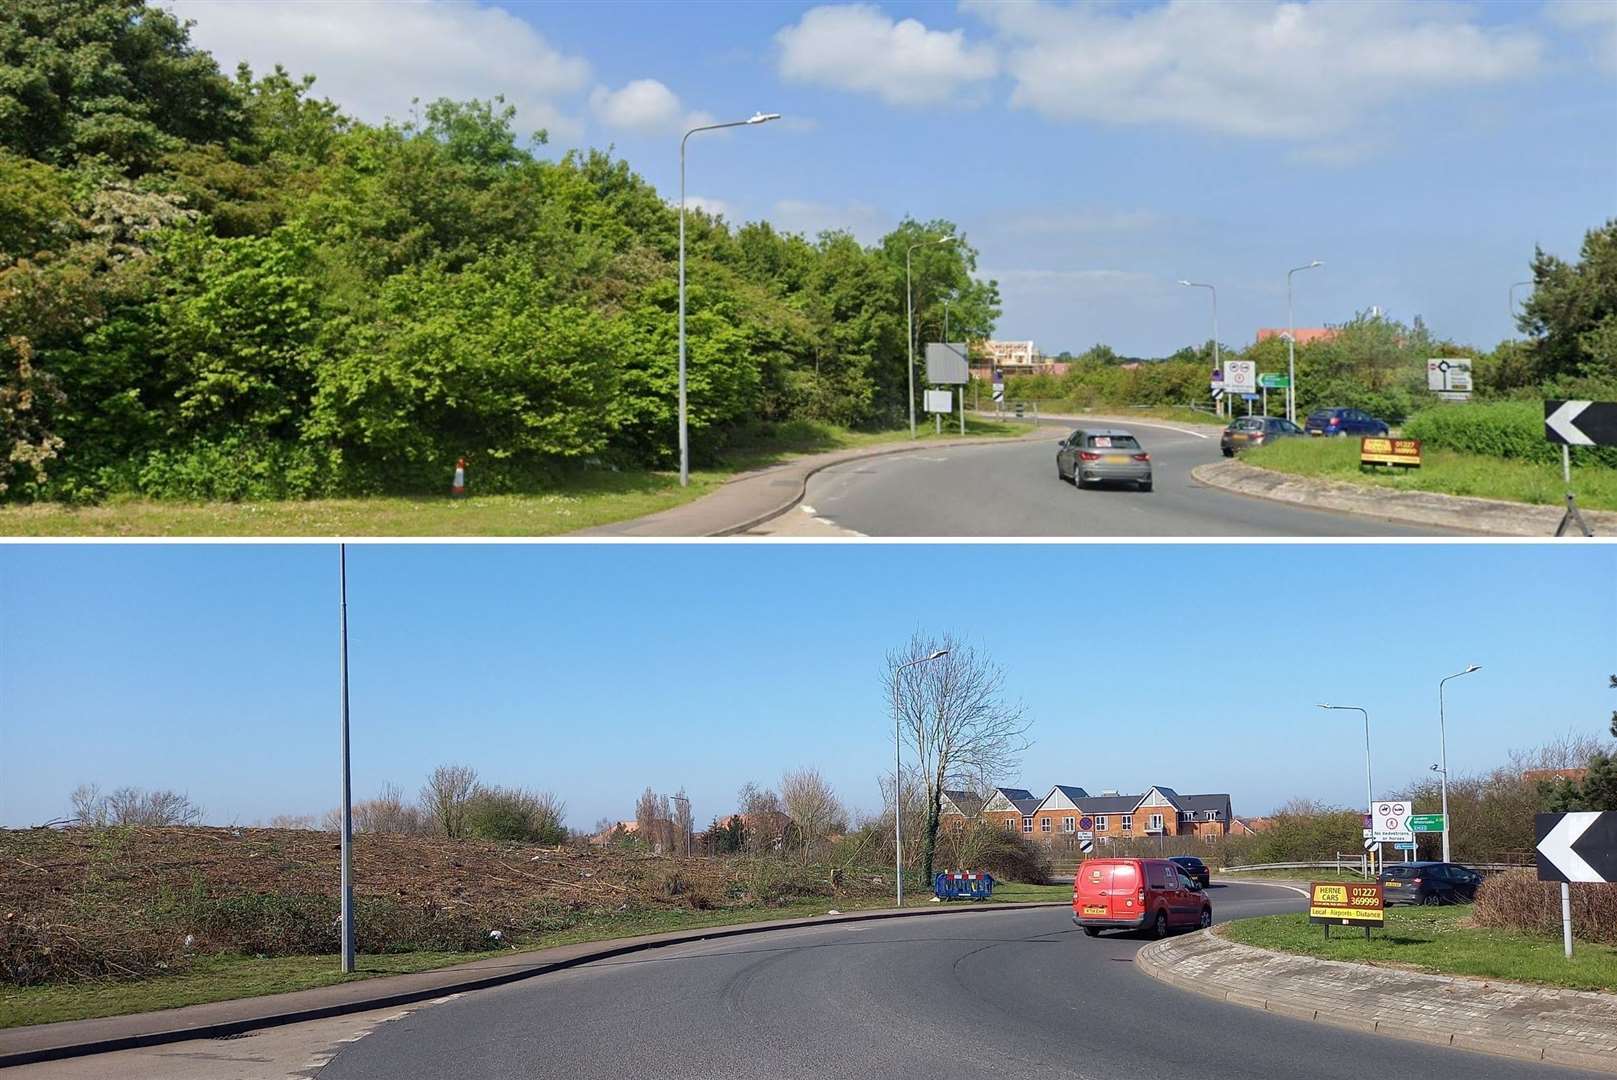 Dozens of trees have been cut down at the roundabout in Canterbury Road roundabout nearest Herne Bay Cemetery